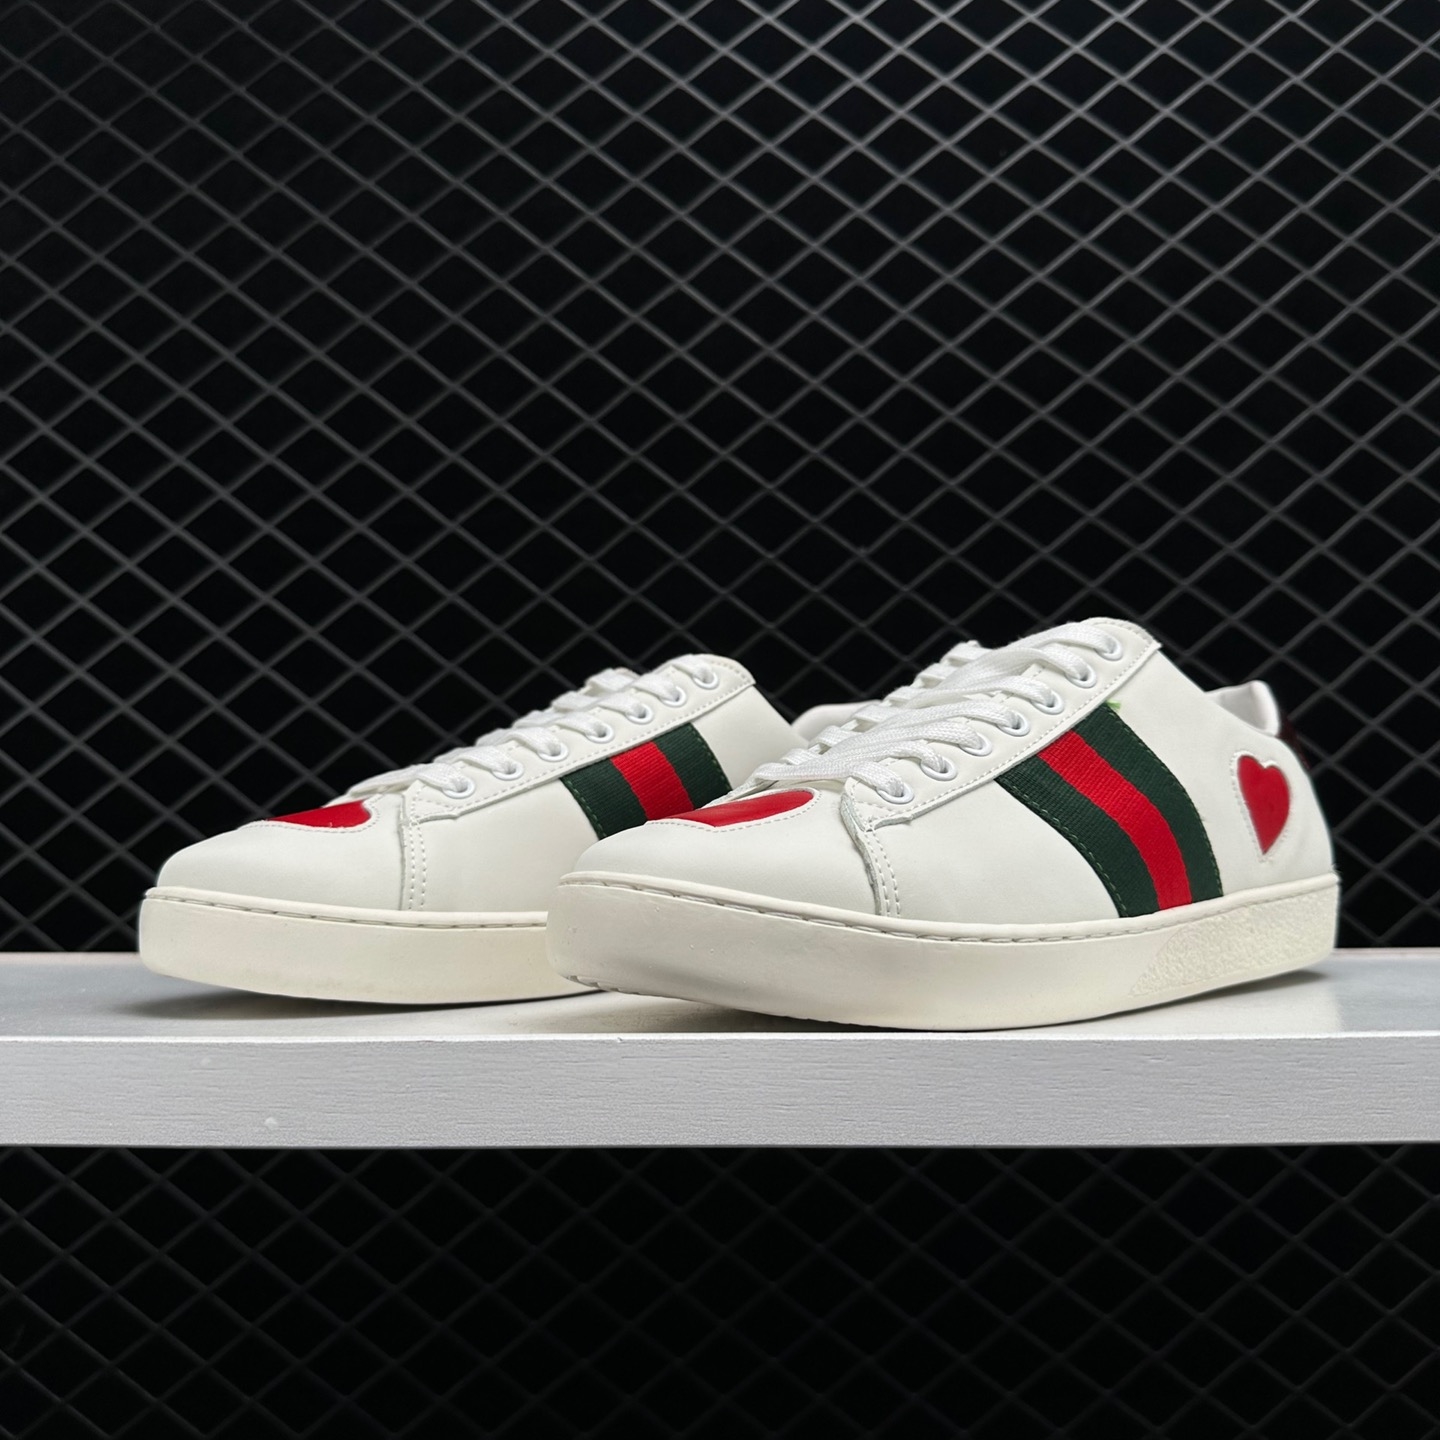 Gucci Ace Embroidered Hearts 435638 A38M0 9074, Luxury Sneakers by Gucci